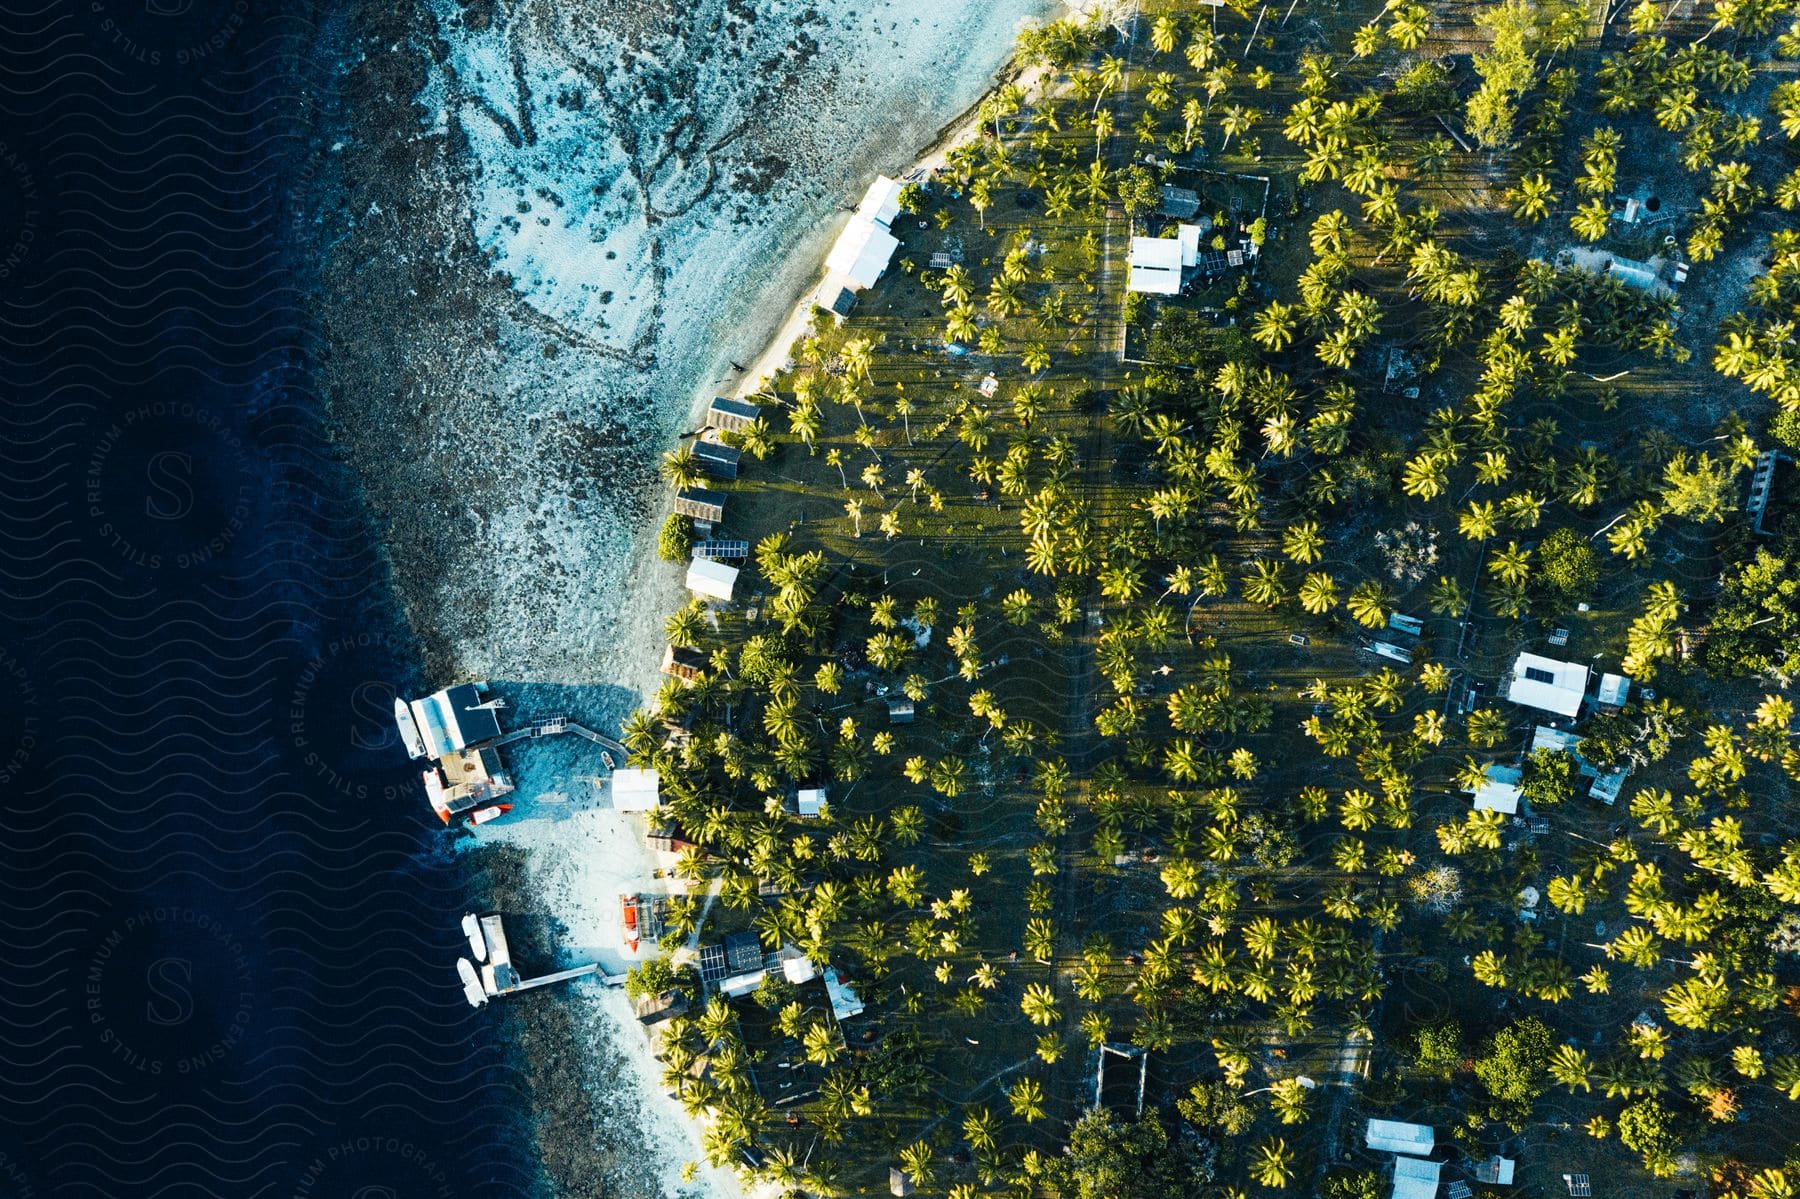 Aerial view of a shoreline with trees and vegetation